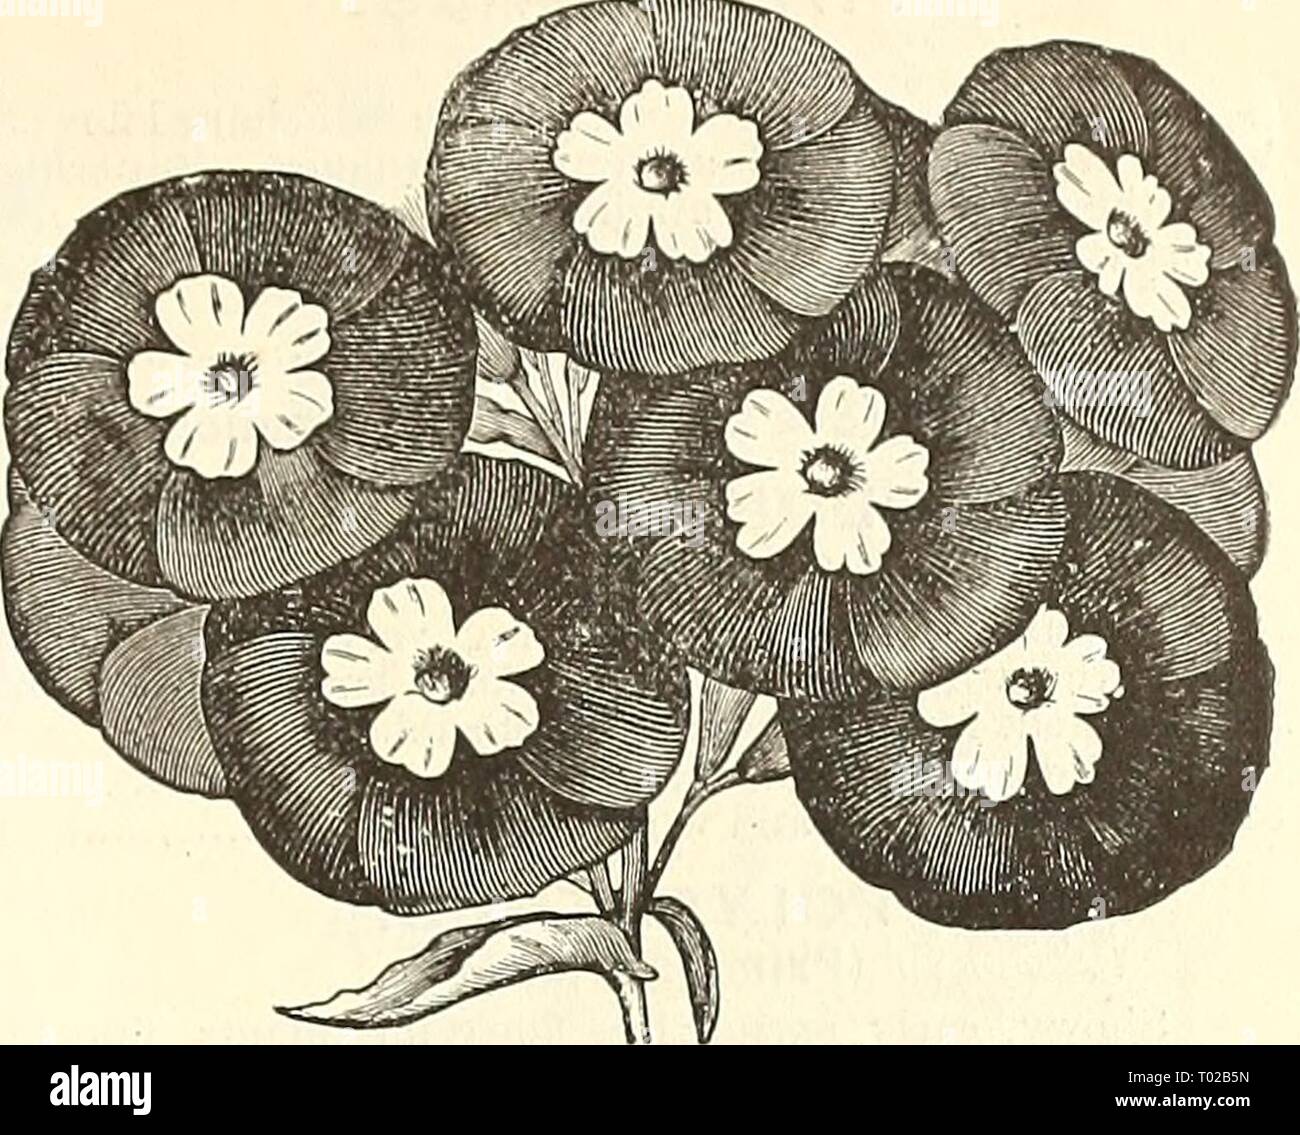 Dreer's garden calendar : 1891 . dreersgardencale1891henr Year: 1891  StAH of QlEULINItUKCH. PHLOX DRUMMONDI FIMBRIATA. STAR OF QUEDLINBURGH. Of dwarf habit, bearing ver^' pretty flowers; varying in color from violet blue to deep rose margined with white ; the edges are slightly fringed. The spines which project from the edge of the flower are i to i an inch long and give the flower a star-like appearance. 6351 Mixed 15 PHLOX DRUMMONDI. An indispensable, constant blooming favorite, which should occupy a prominent place in every garden for clumps or massing; quite as desirable as the Verbena fo Stock Photo